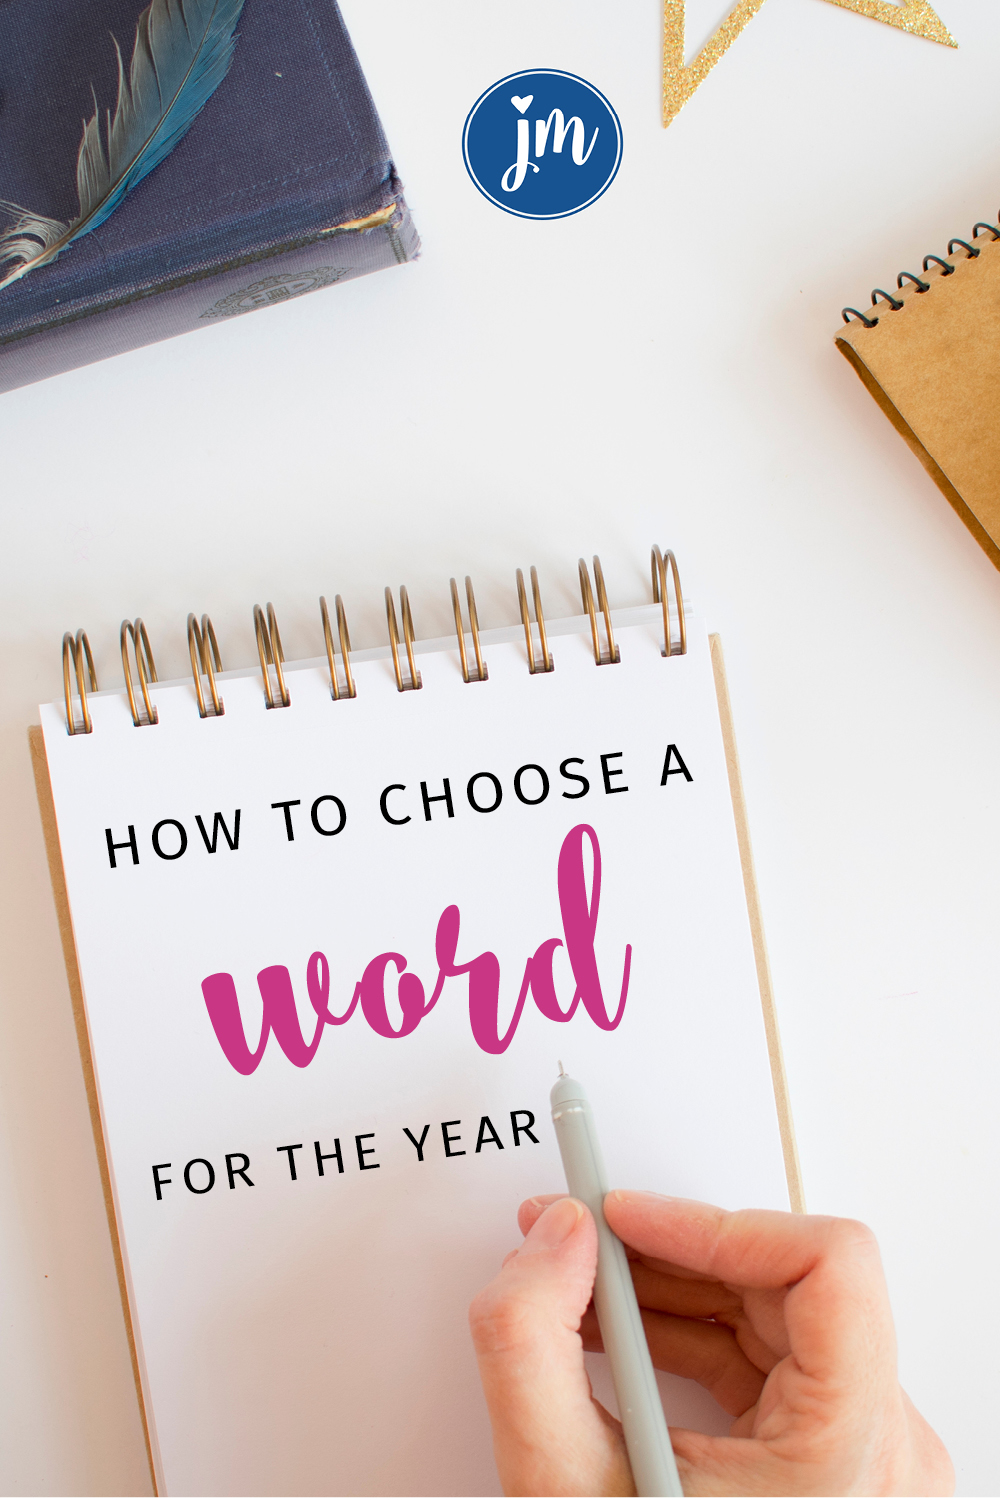 How to Choose a Word of the Year